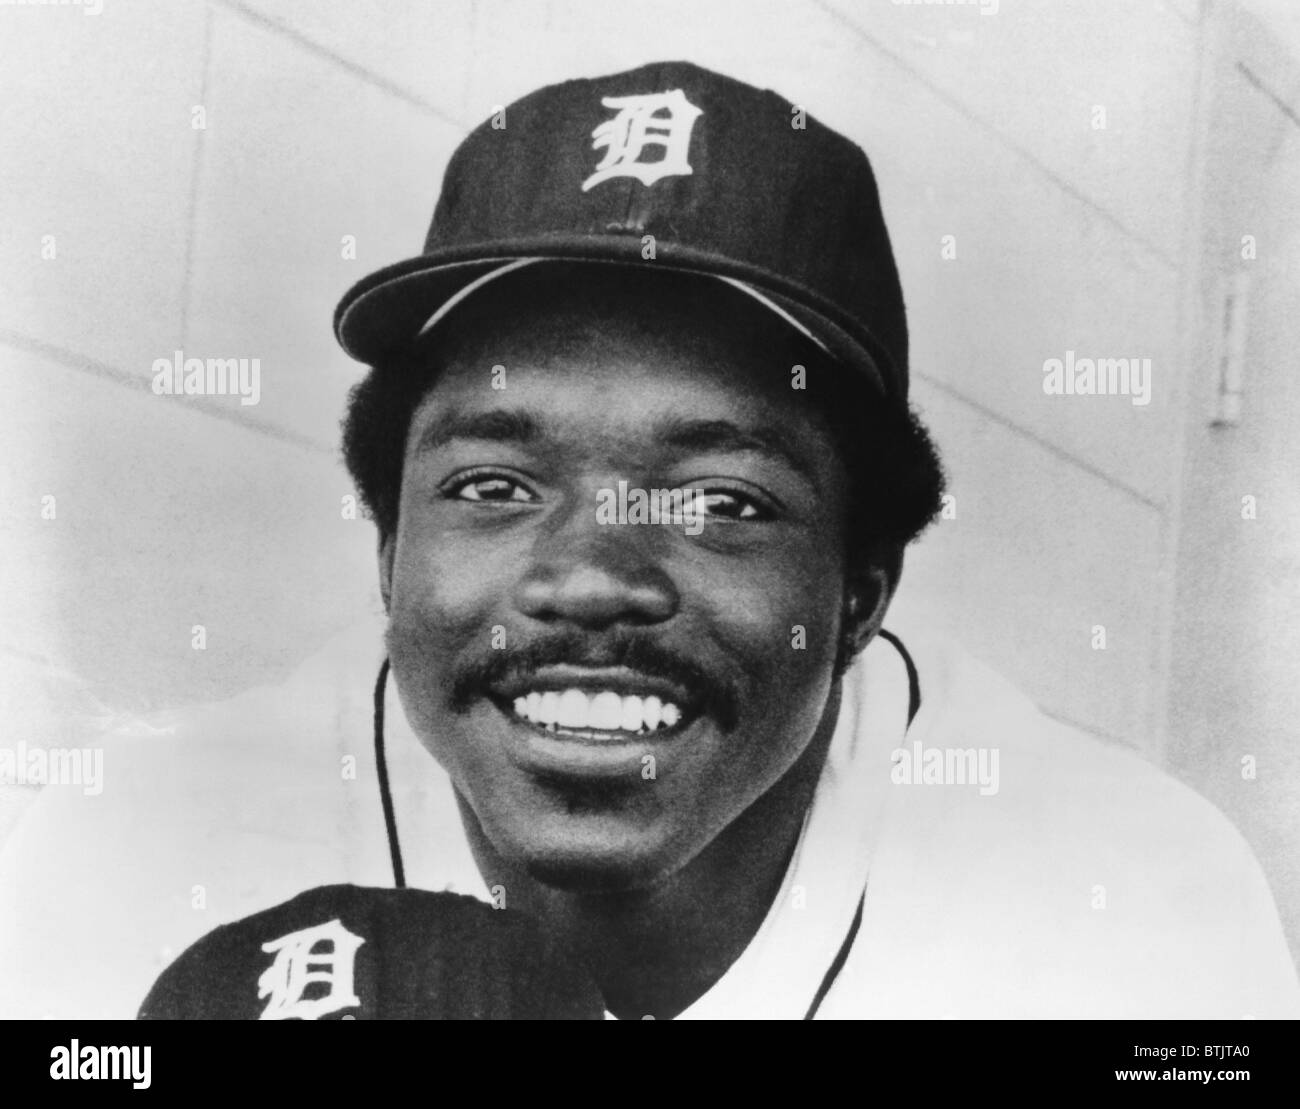 Ron LeFlore, American Major League Baseball outfielder with the Detroit Tigers. Circa 1970s. CSU Archives/Courtesy Everett Colle Stock Photo